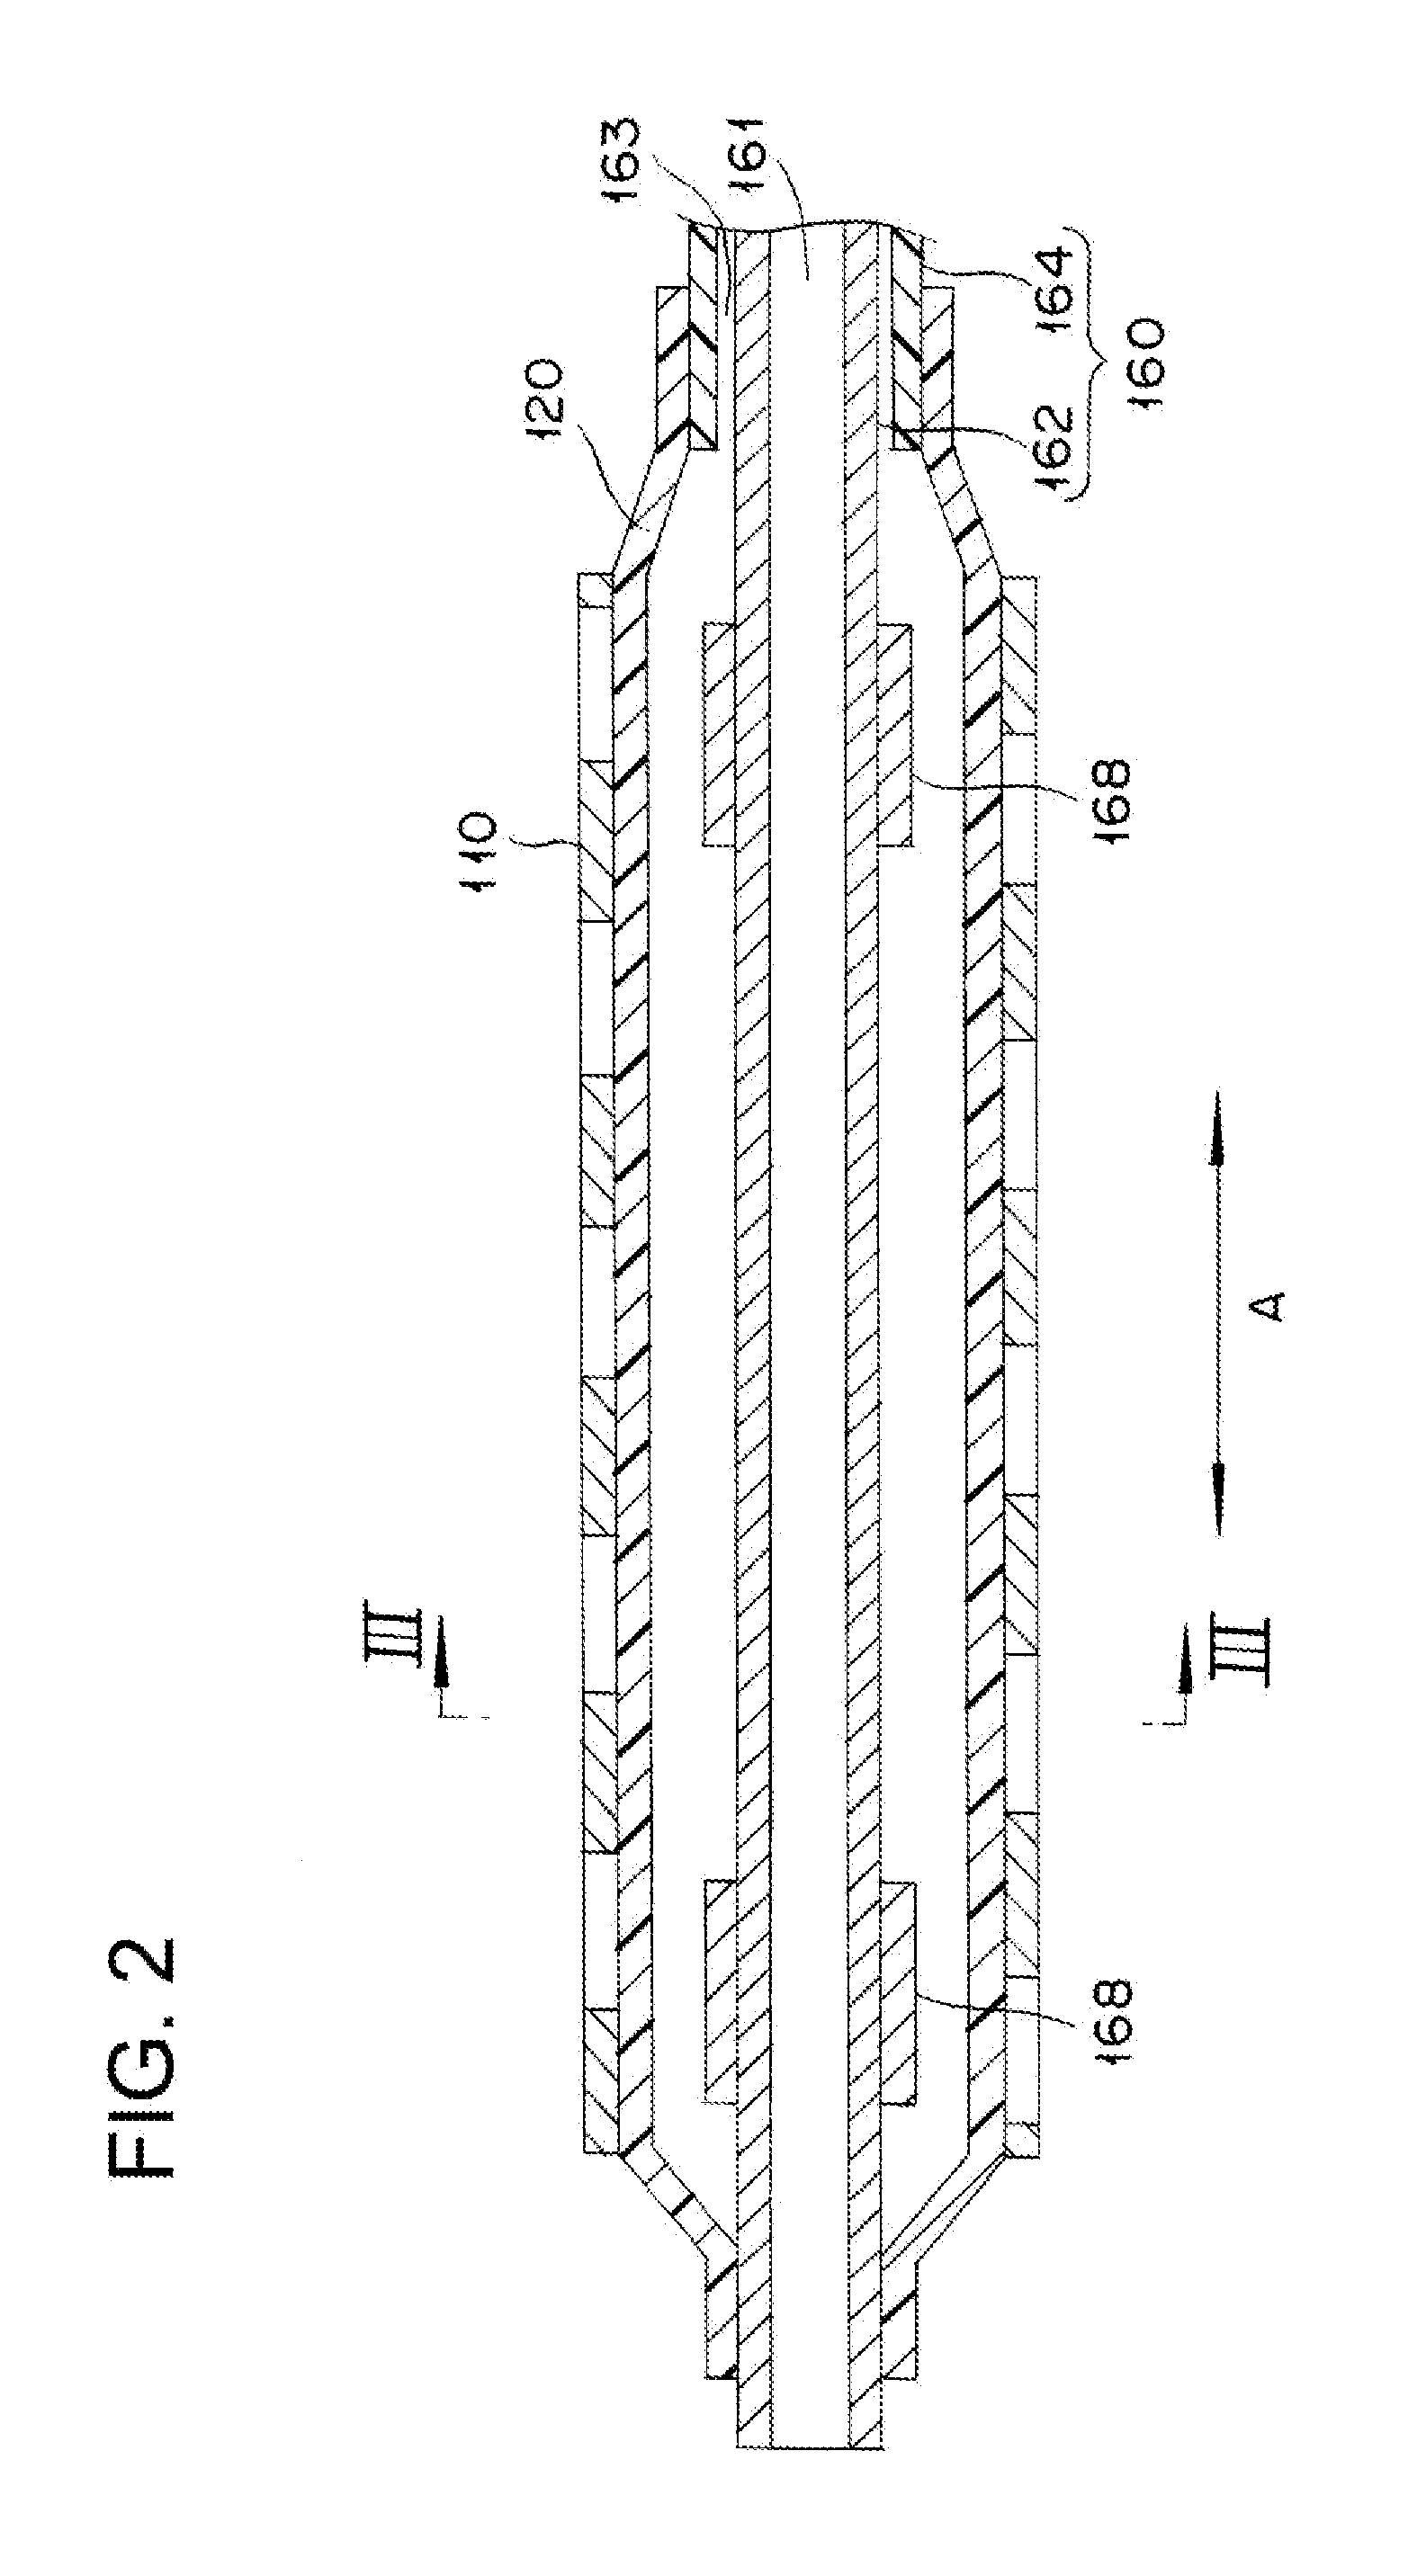 Indwelling device delivery system